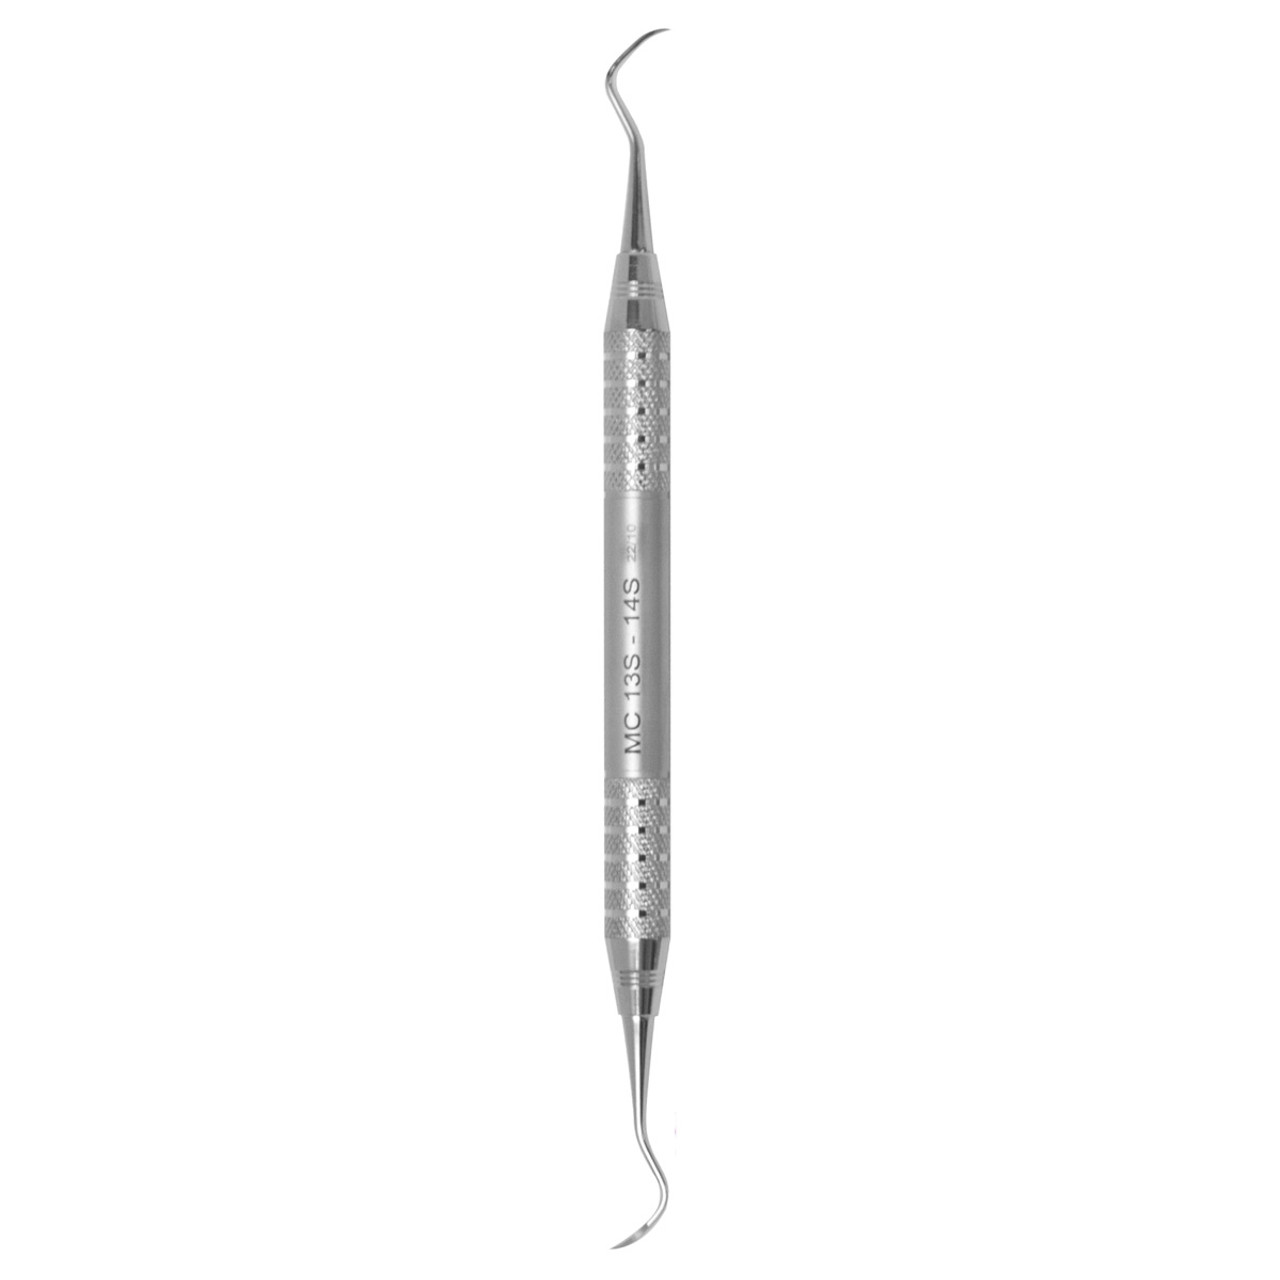 A.Titan - Designed for tight posterior areas with pocket depths of 3mm or less the in.Sin. denotes sharpened to a point. Has Life Steel Handle.